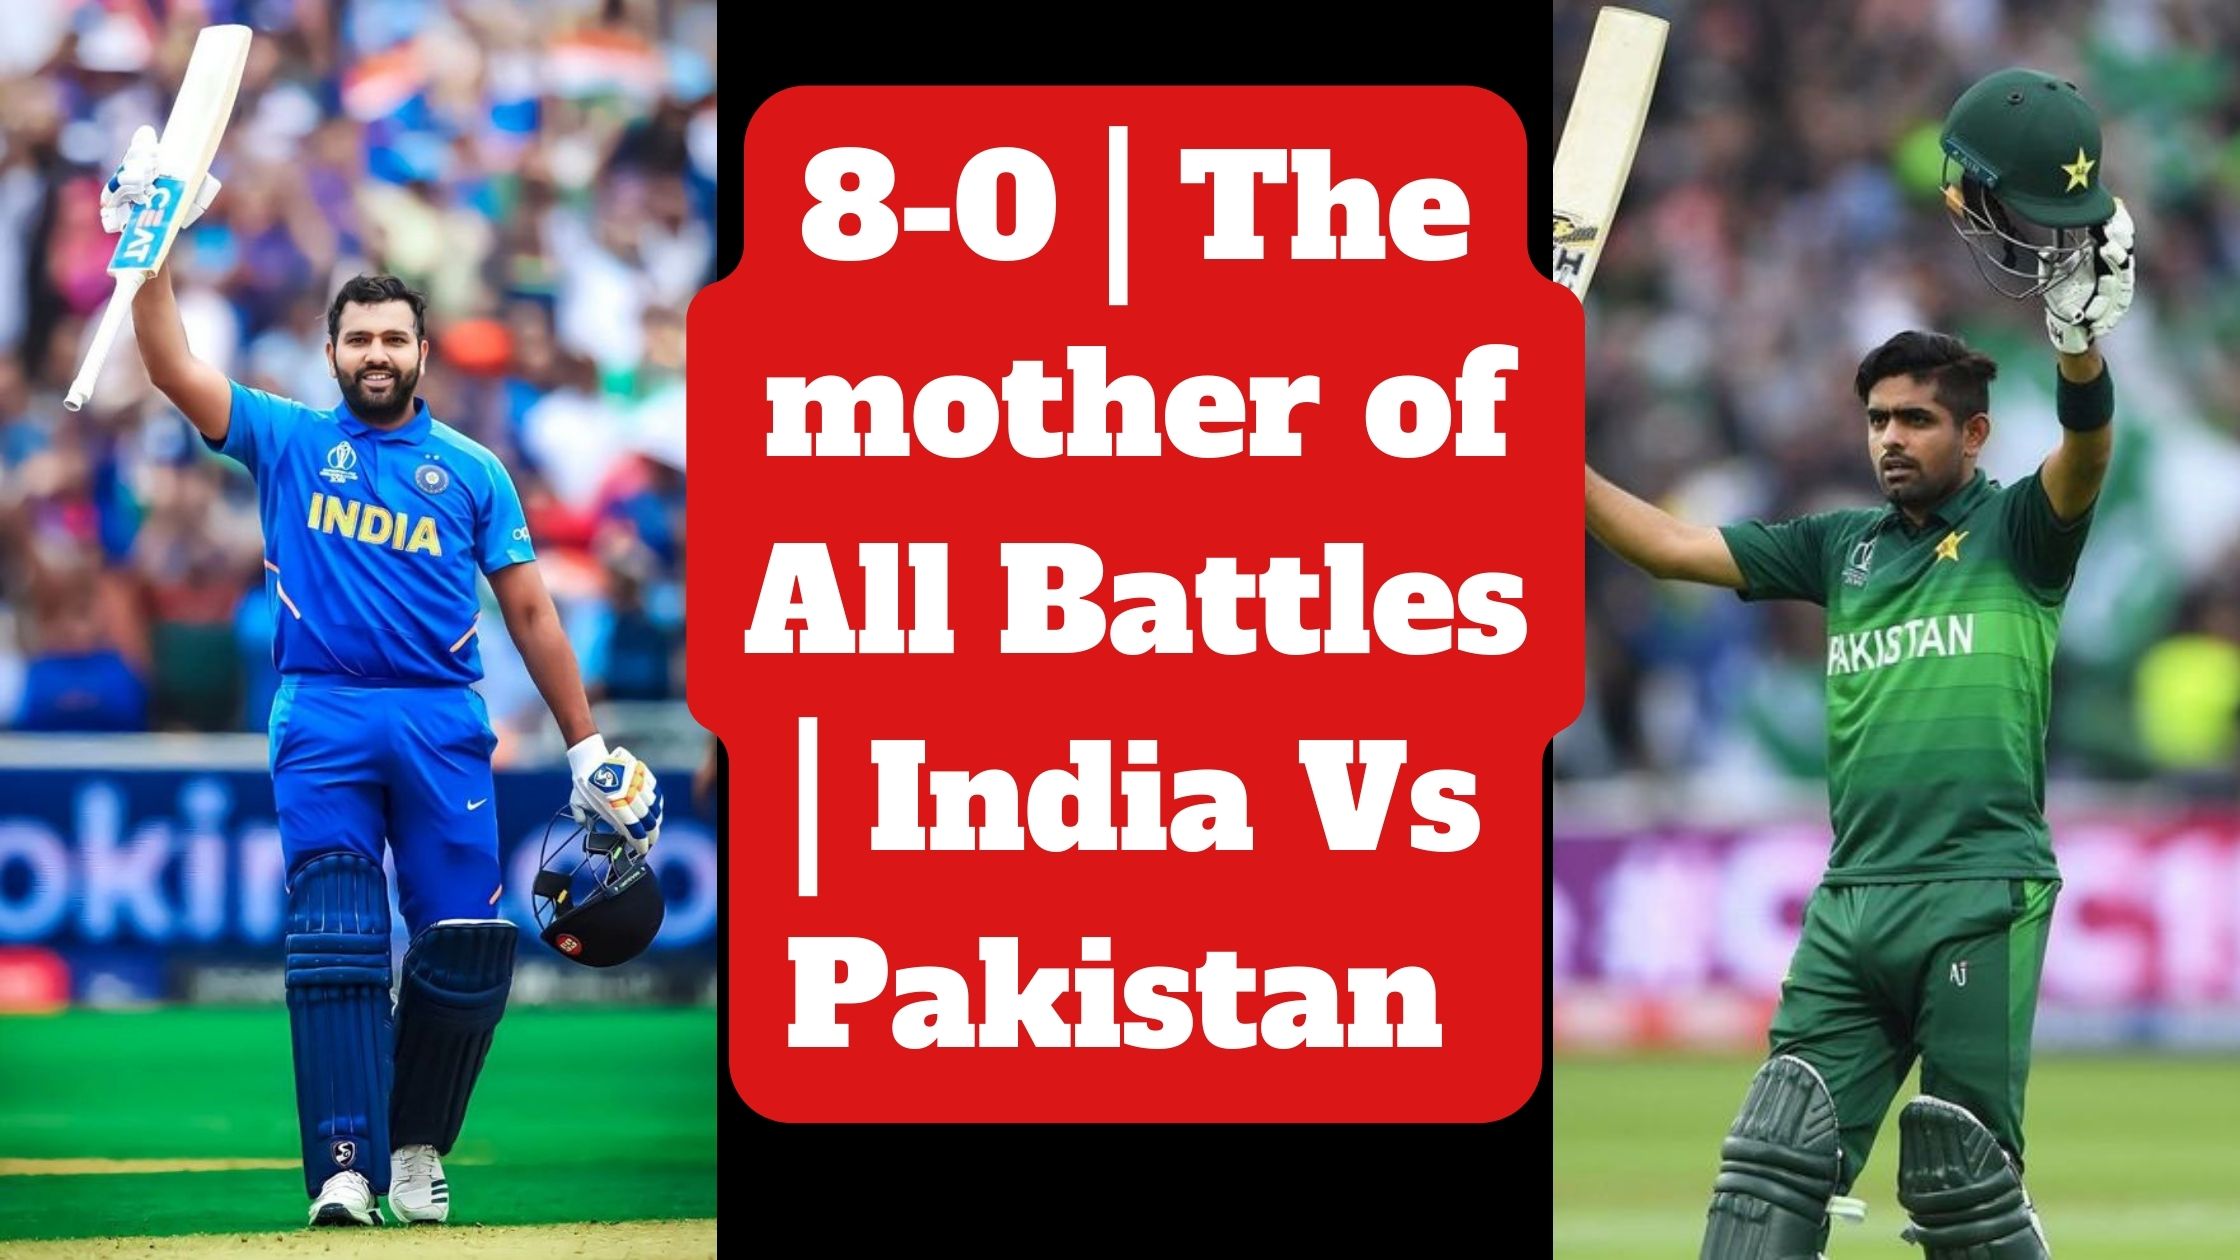 8-0 The mother of All Battles India Vs Pakistan